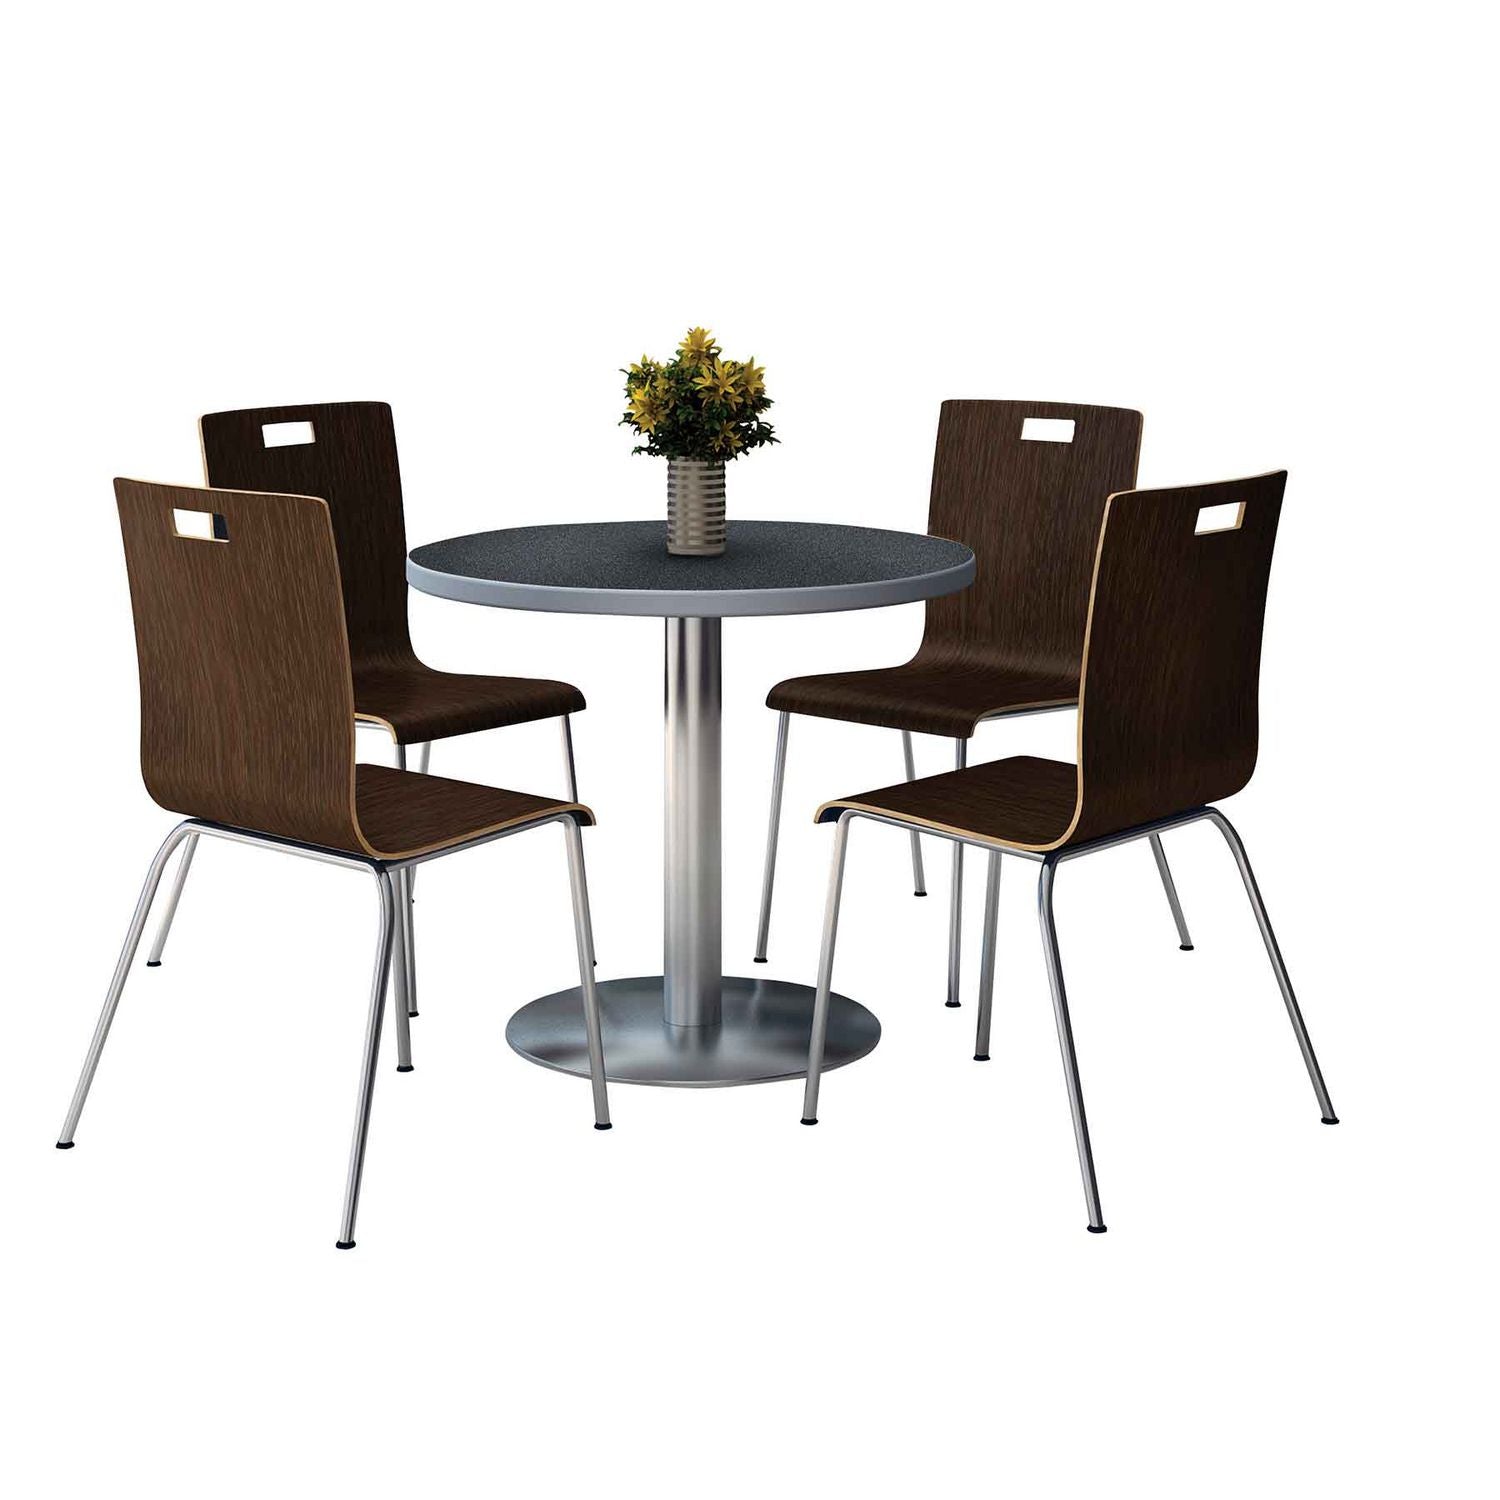 pedestal-table-with-four-espresso-jive-series-chairs-round-36-dia-x-29h-graphite-nebula-ships-in-4-6-business-days_kfi810389025002 - 1